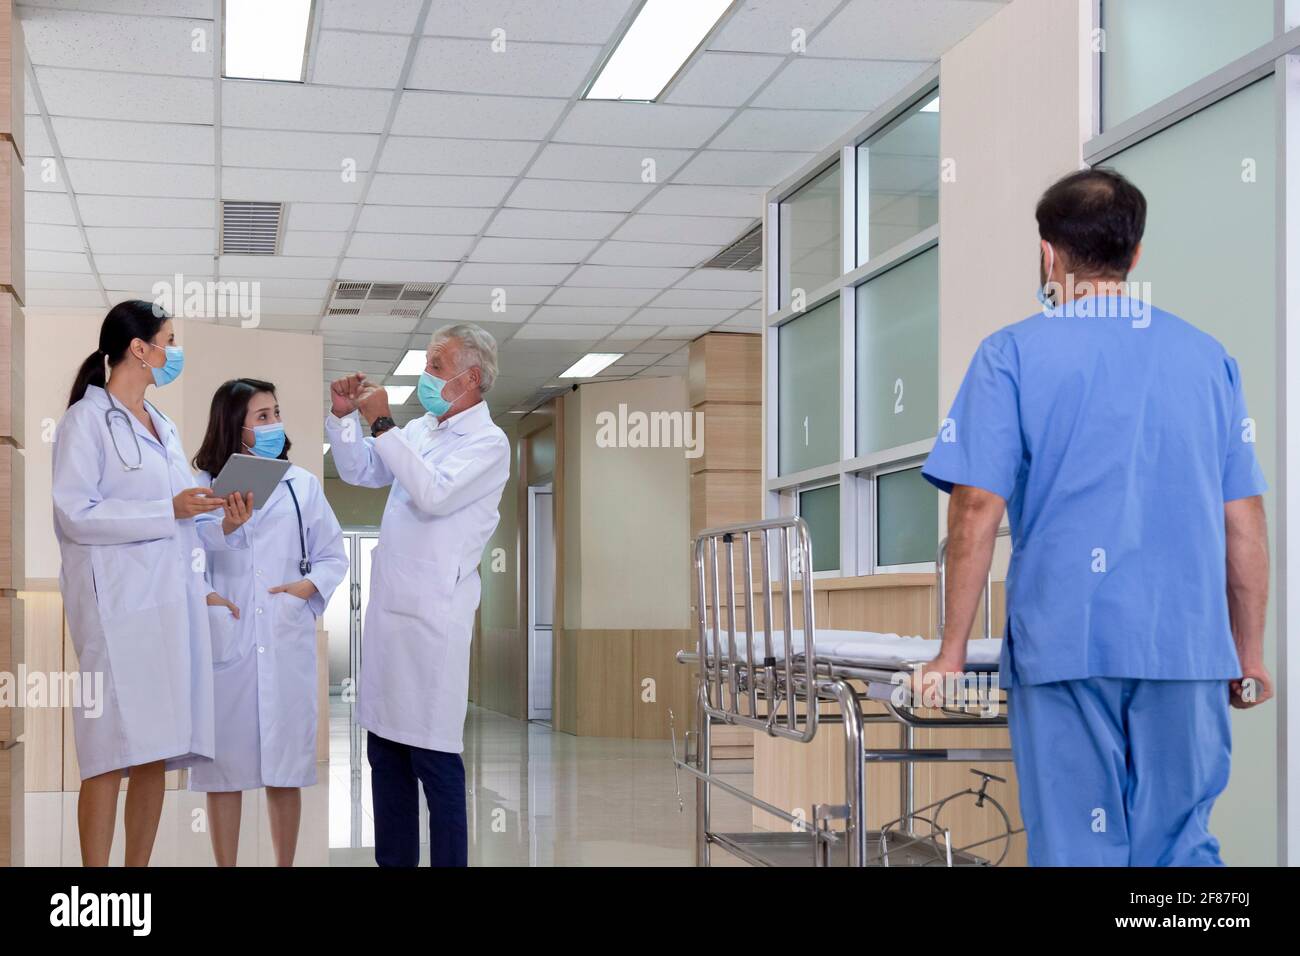 senior professional doctor consult and discuss with woman doctors in serious tumor and cancer surgery case while male nurse pushing stretcher gurney b Stock Photo